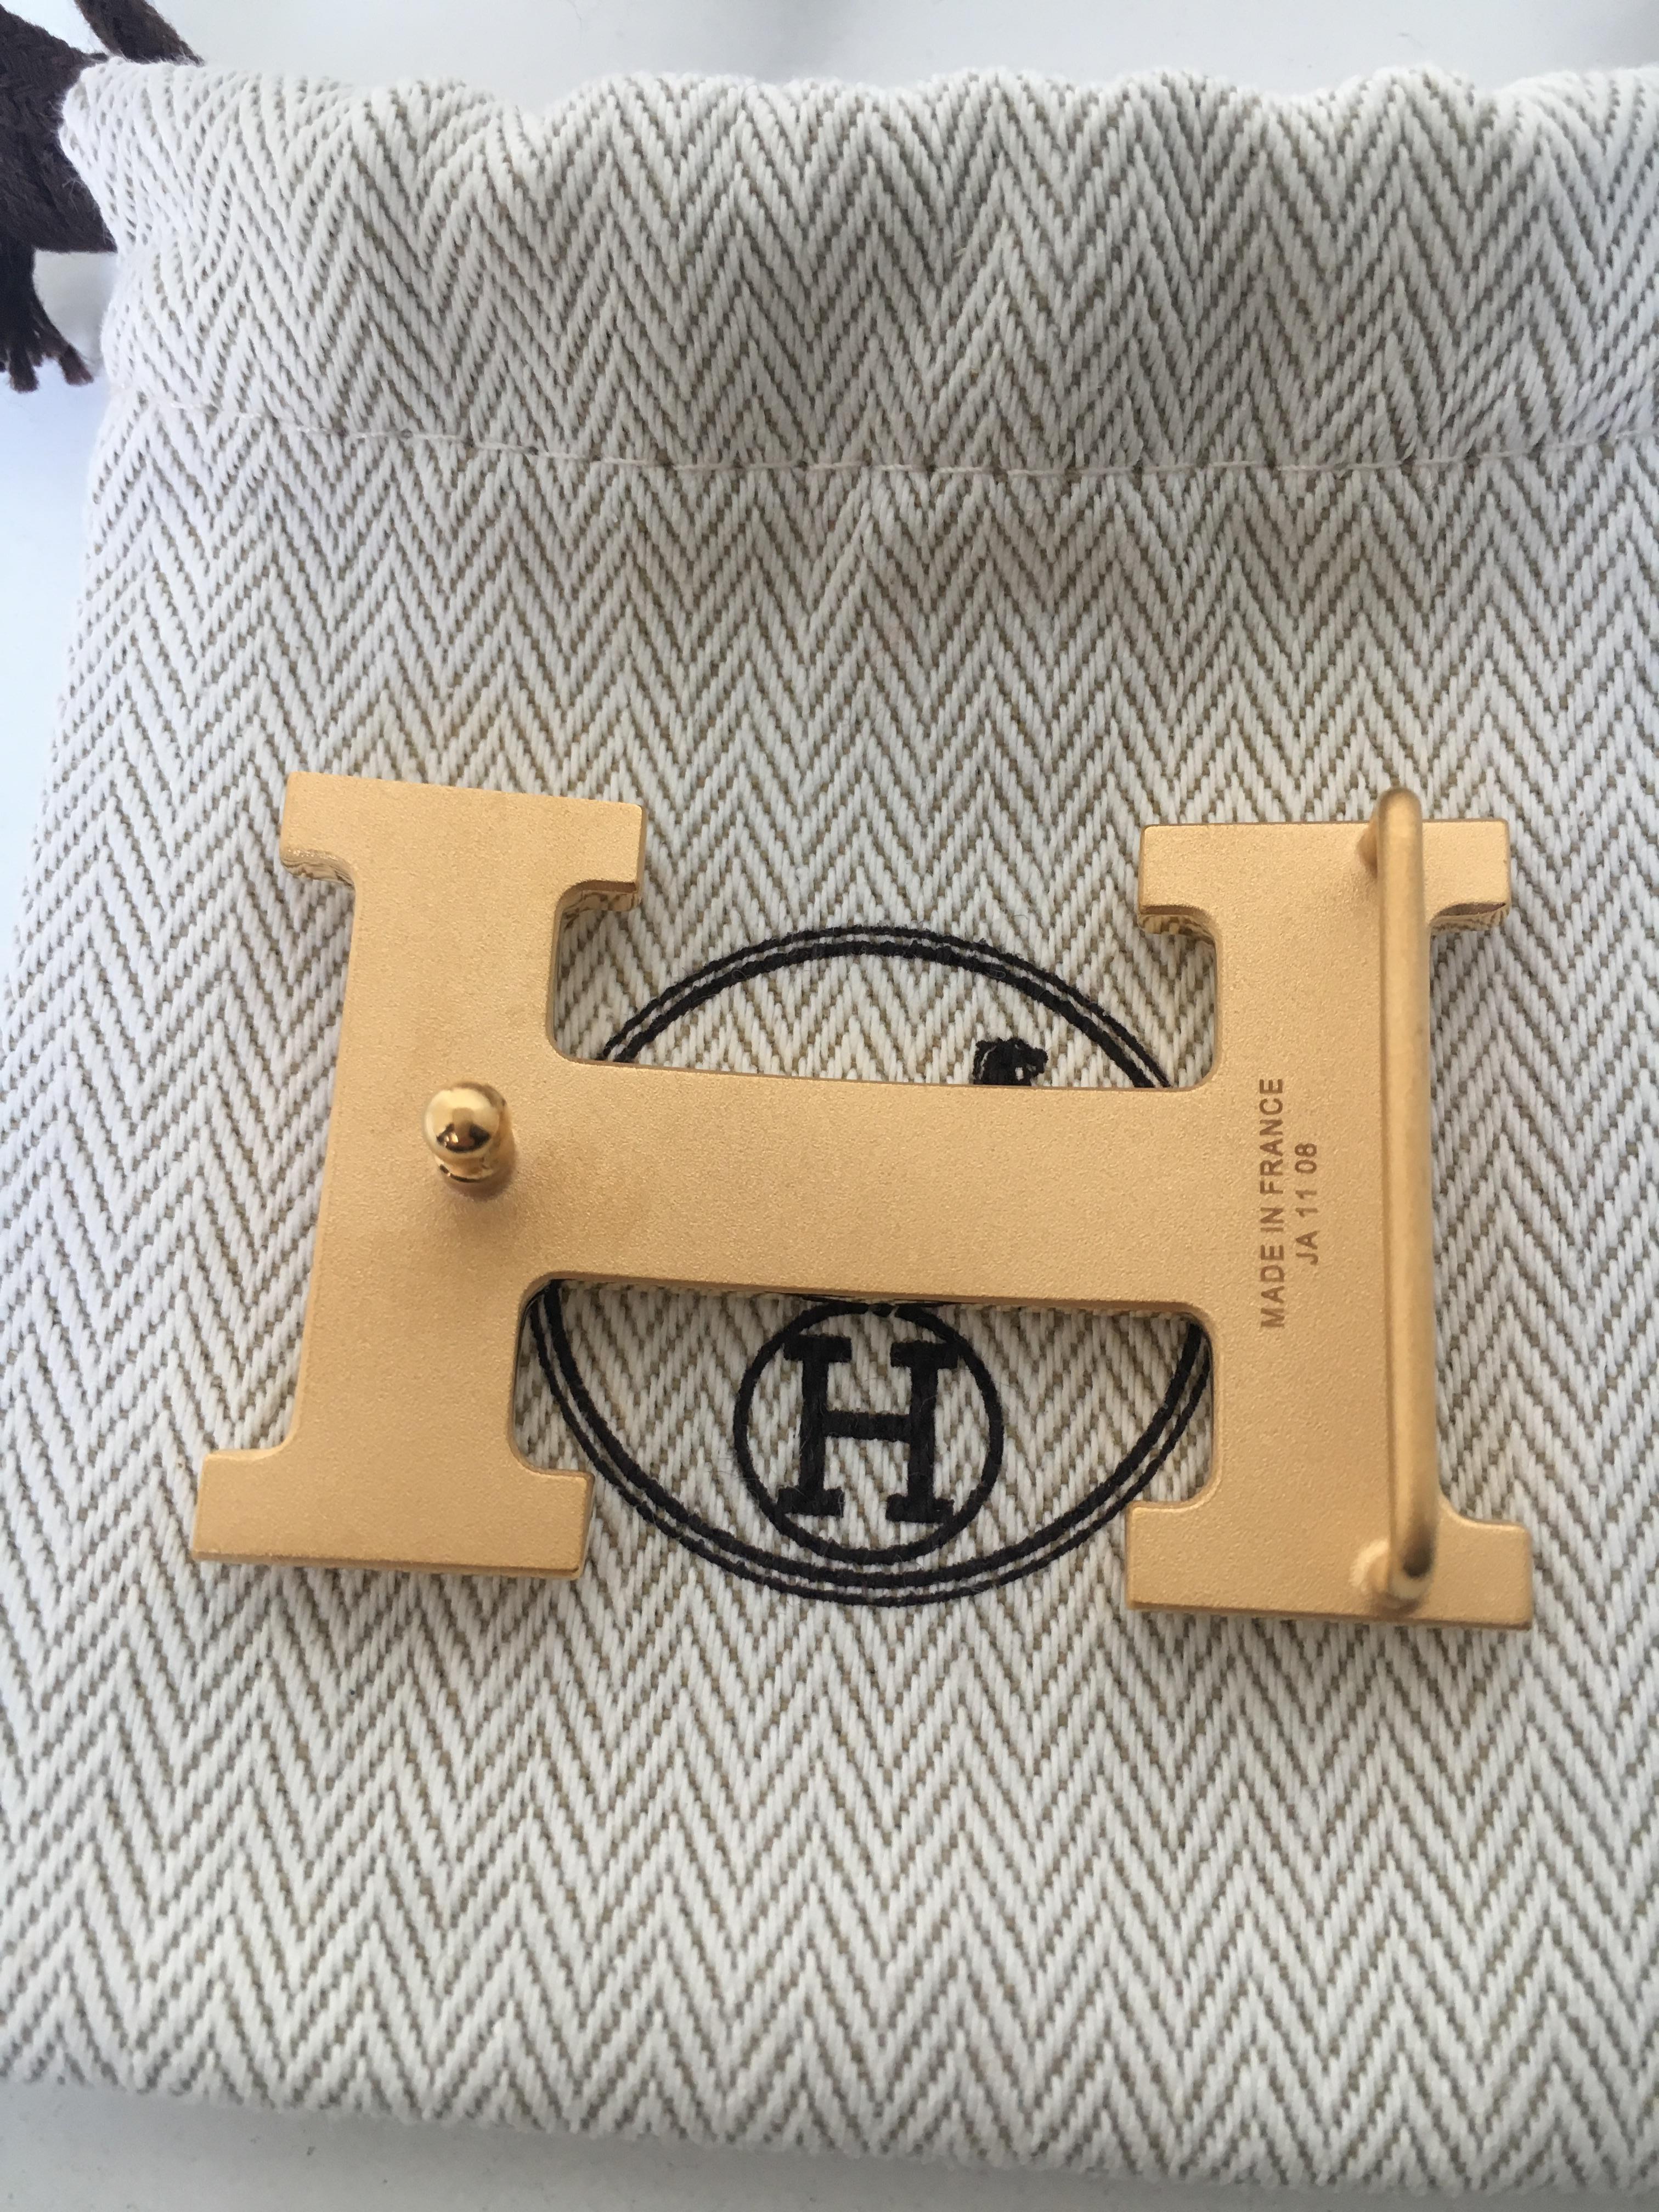 Hermes QUIZZ brushed GOLD color belt buckle 32mm.

This buckle will fit all 32mm wide belt straps by Hermes. 
The buckle is in super mint perfect condition.